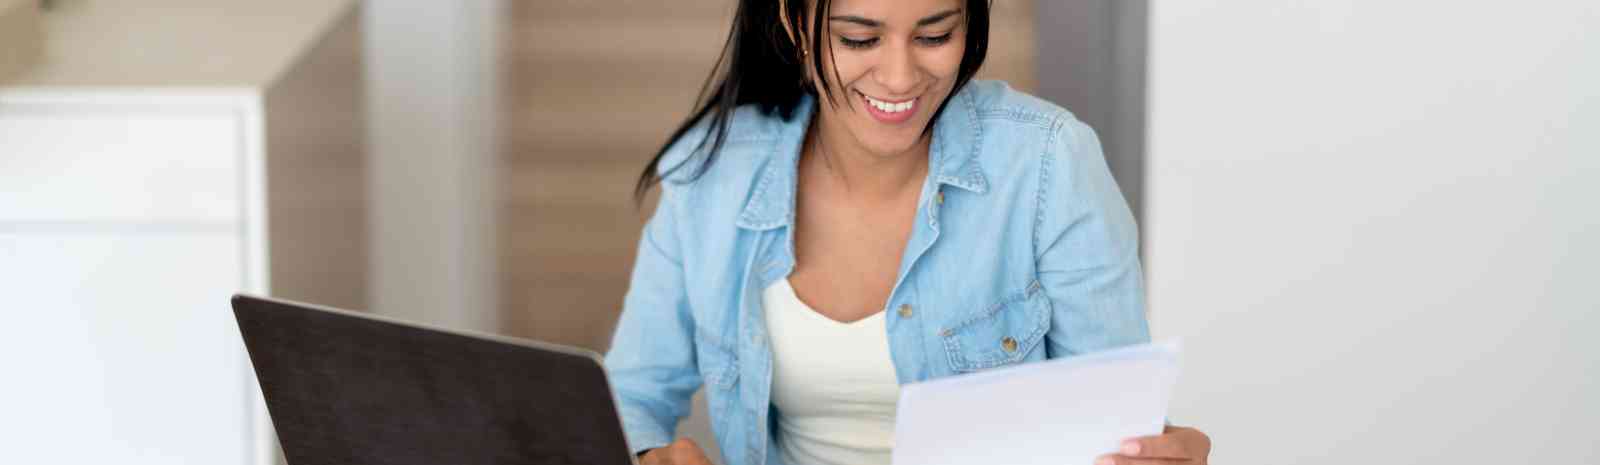 Young woman sitting with a laptop looking at a paper.